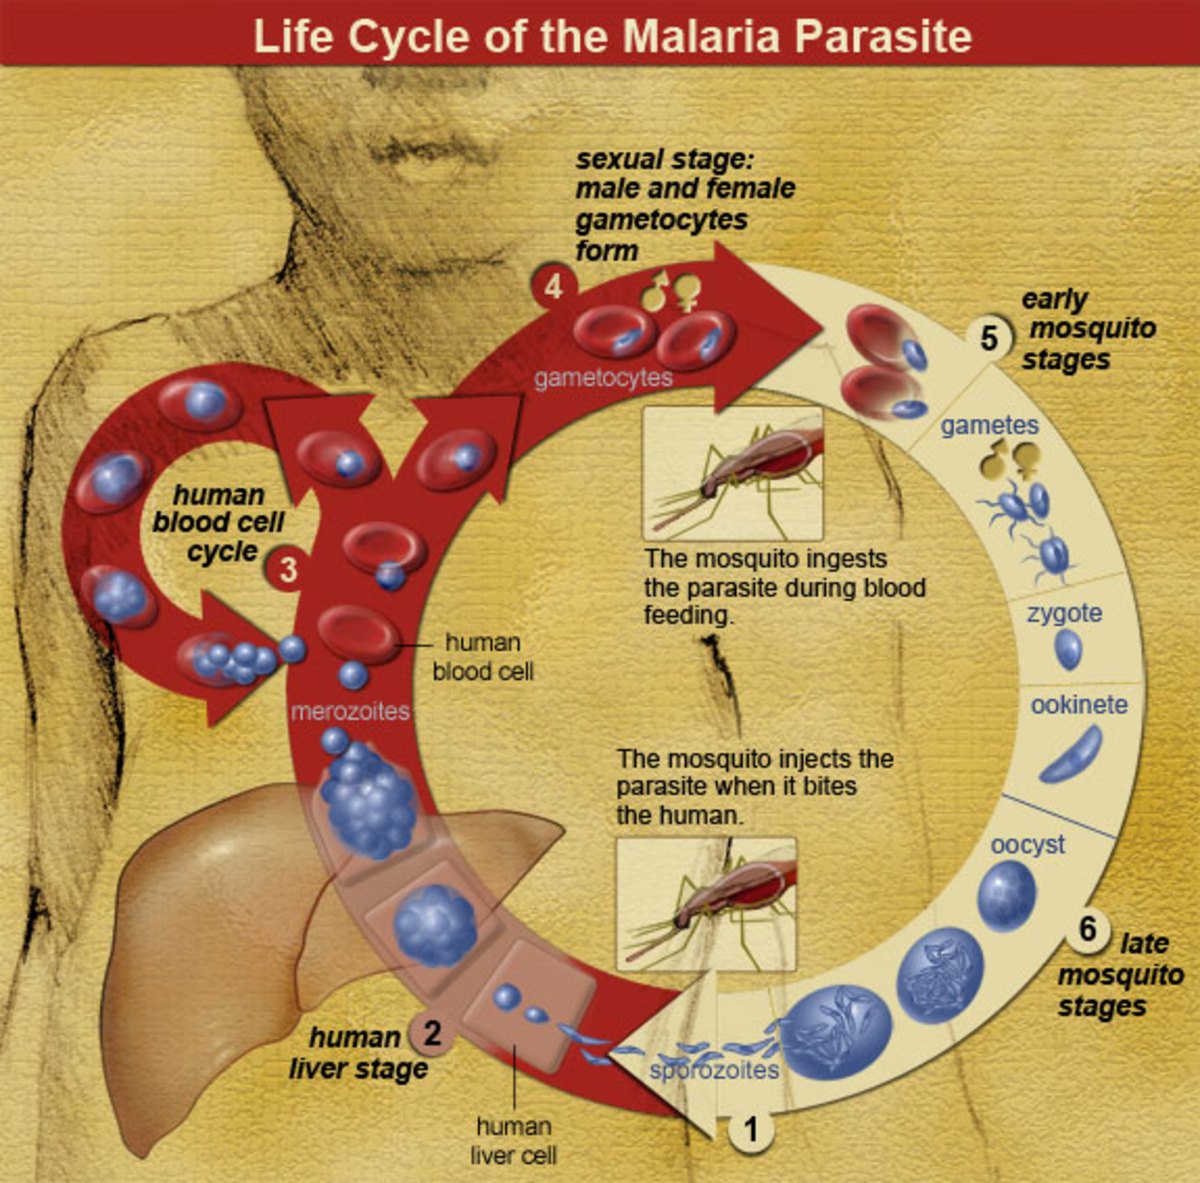 clinical-significance-of-the-malaria-parasite-the-life-cycle-of-the-plasmodium